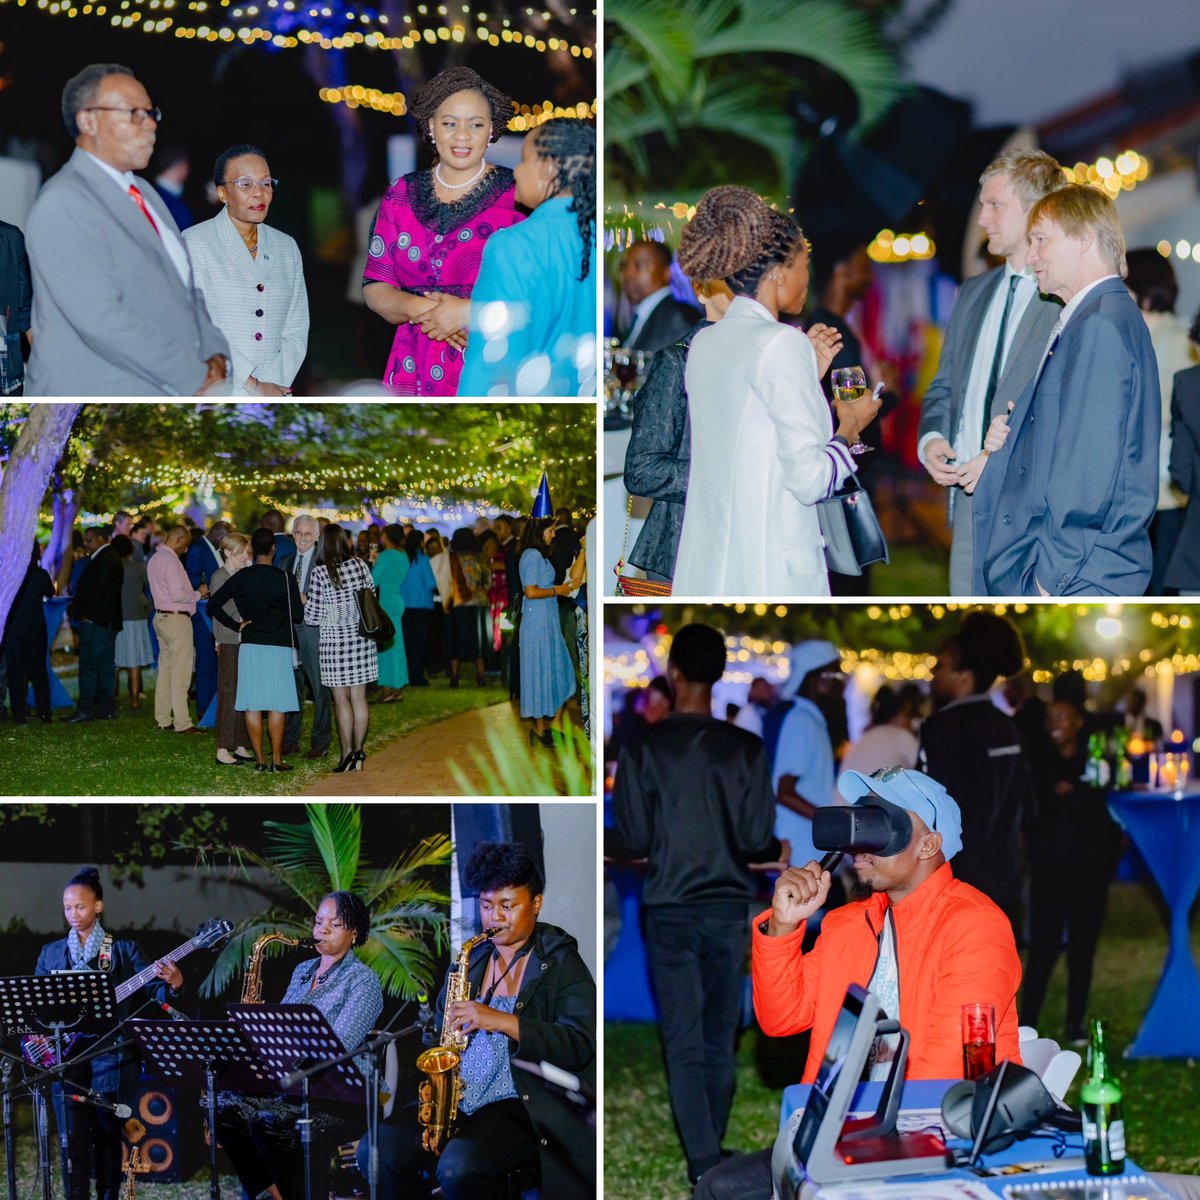 #EuropeDay you could visit  #OkavangoDelta with @NatGeo and learn about the work of 🇪🇺 partners in support of livelihoods and jobs.

Thanking @TheECOEXISTproj @giz_gmbh @FAOBotswana Impact Fund and all our partners for joining the celebration and Fleek Band @bosjebw for 🎶🎷🎵